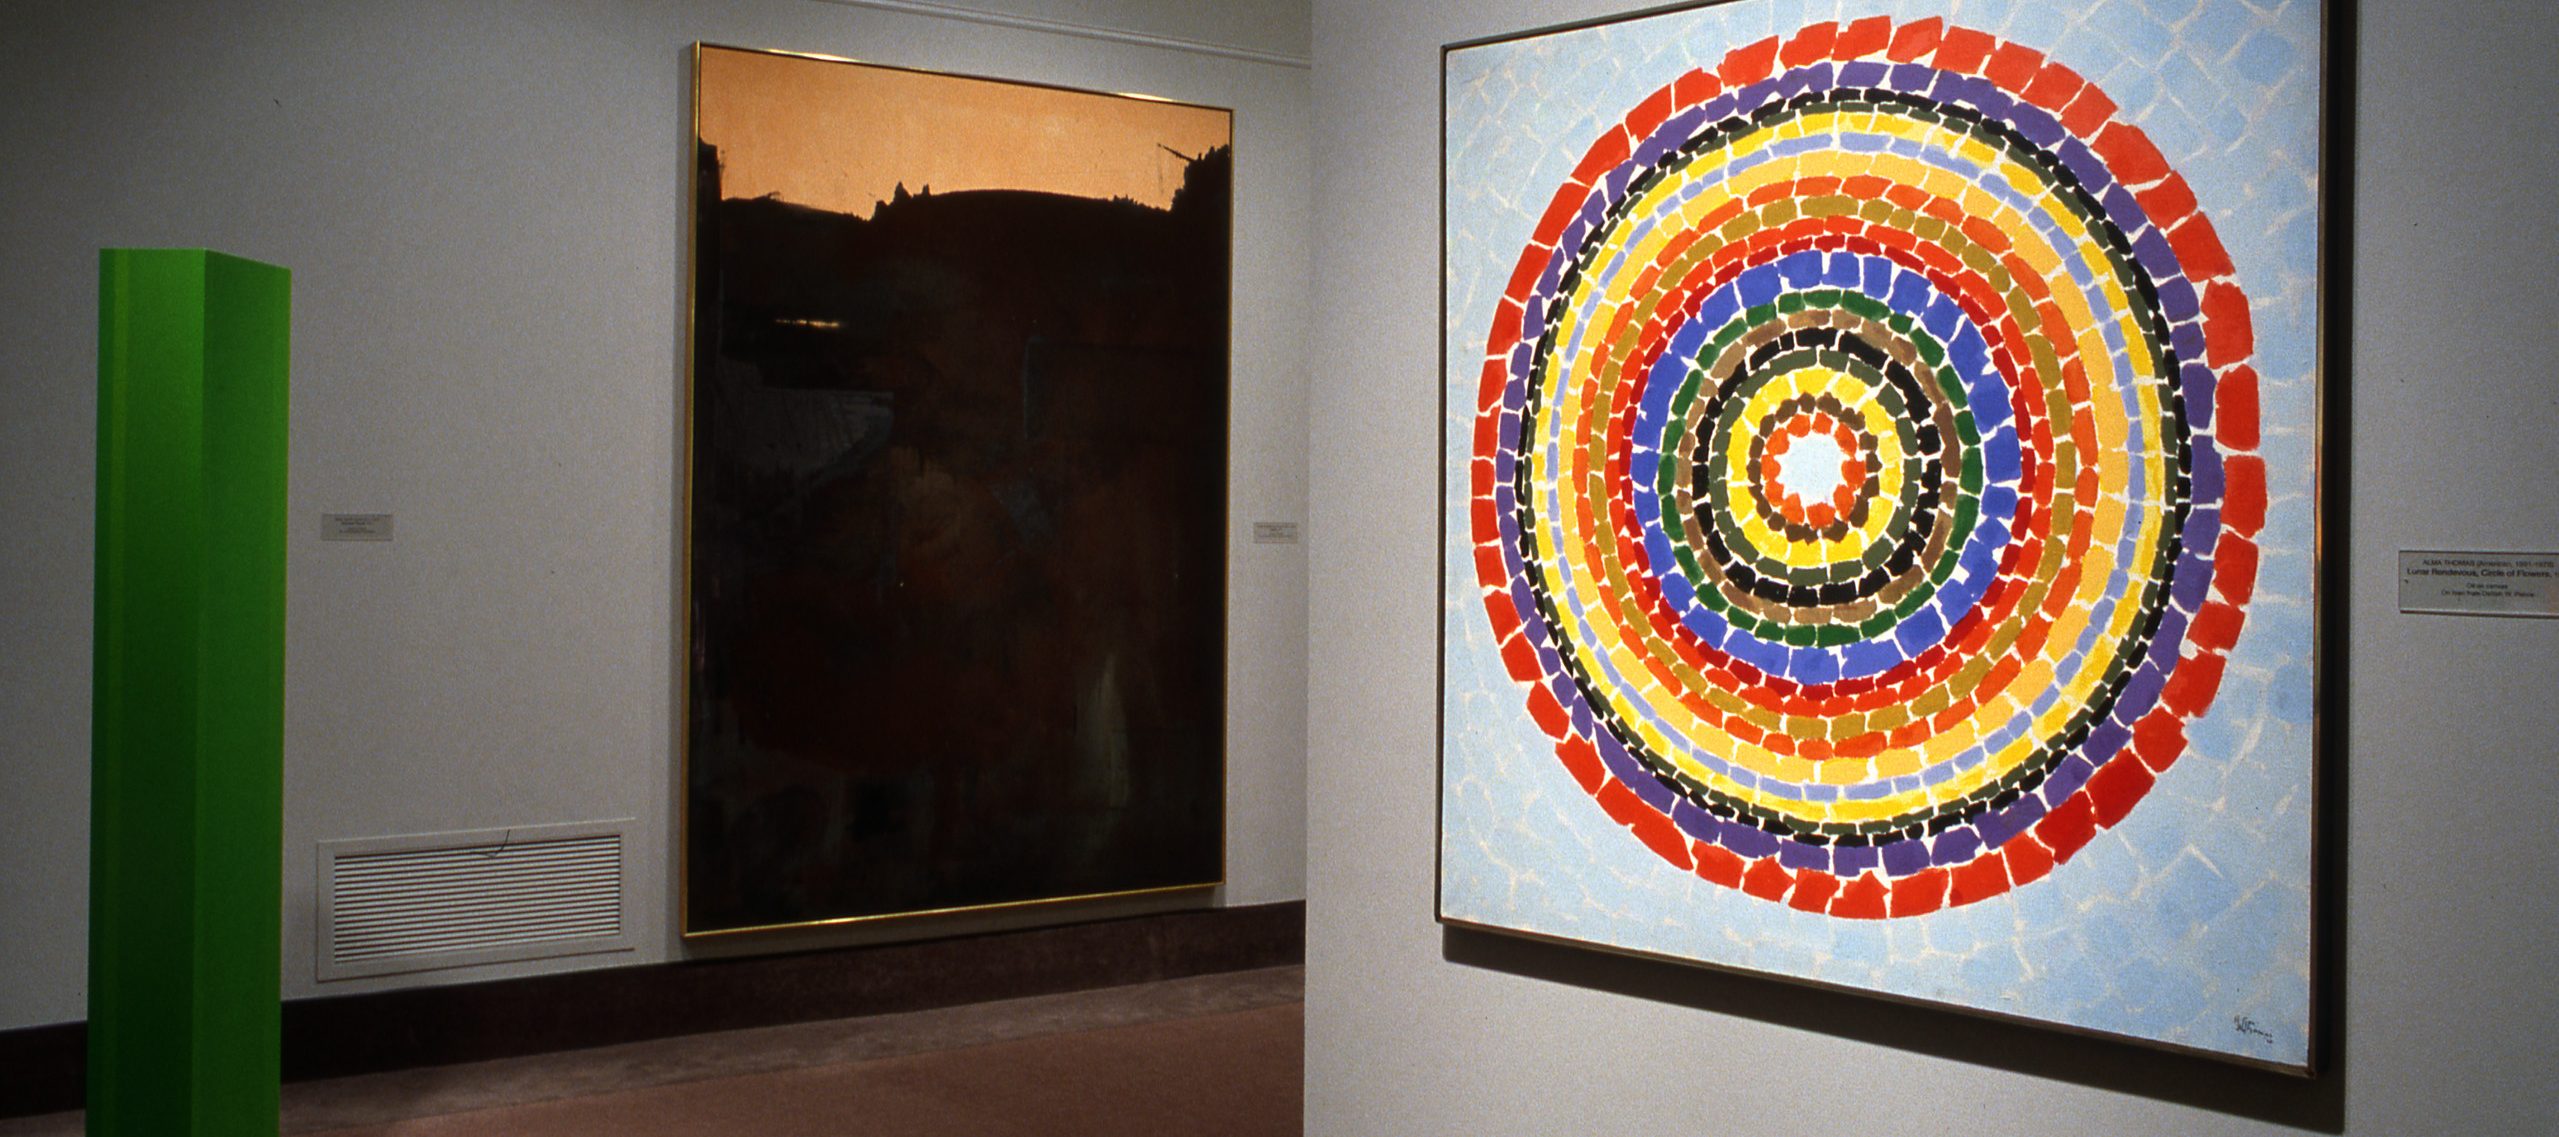 Gallery view of three artworks: a tall green column on the left, a multicolored painting of many concentric circles on the right, and a large black-and-white painting in the background between the two.